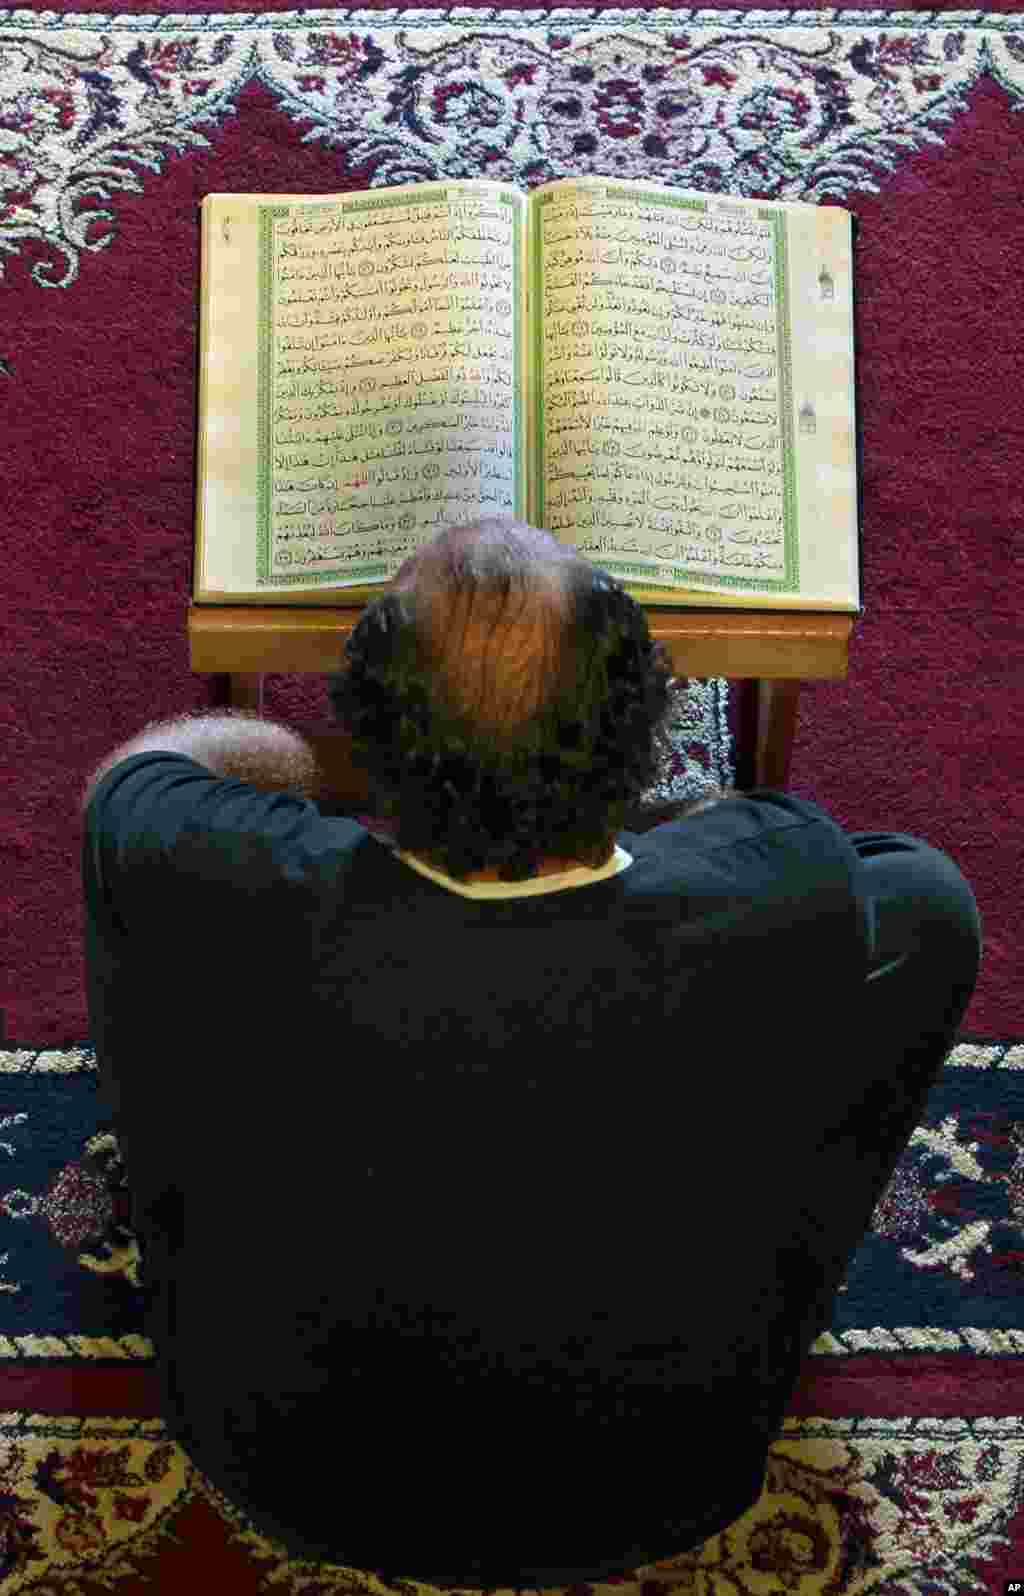 A man reads a Quran at a mosque in Beirut, Lebanon, July 10, 2013.